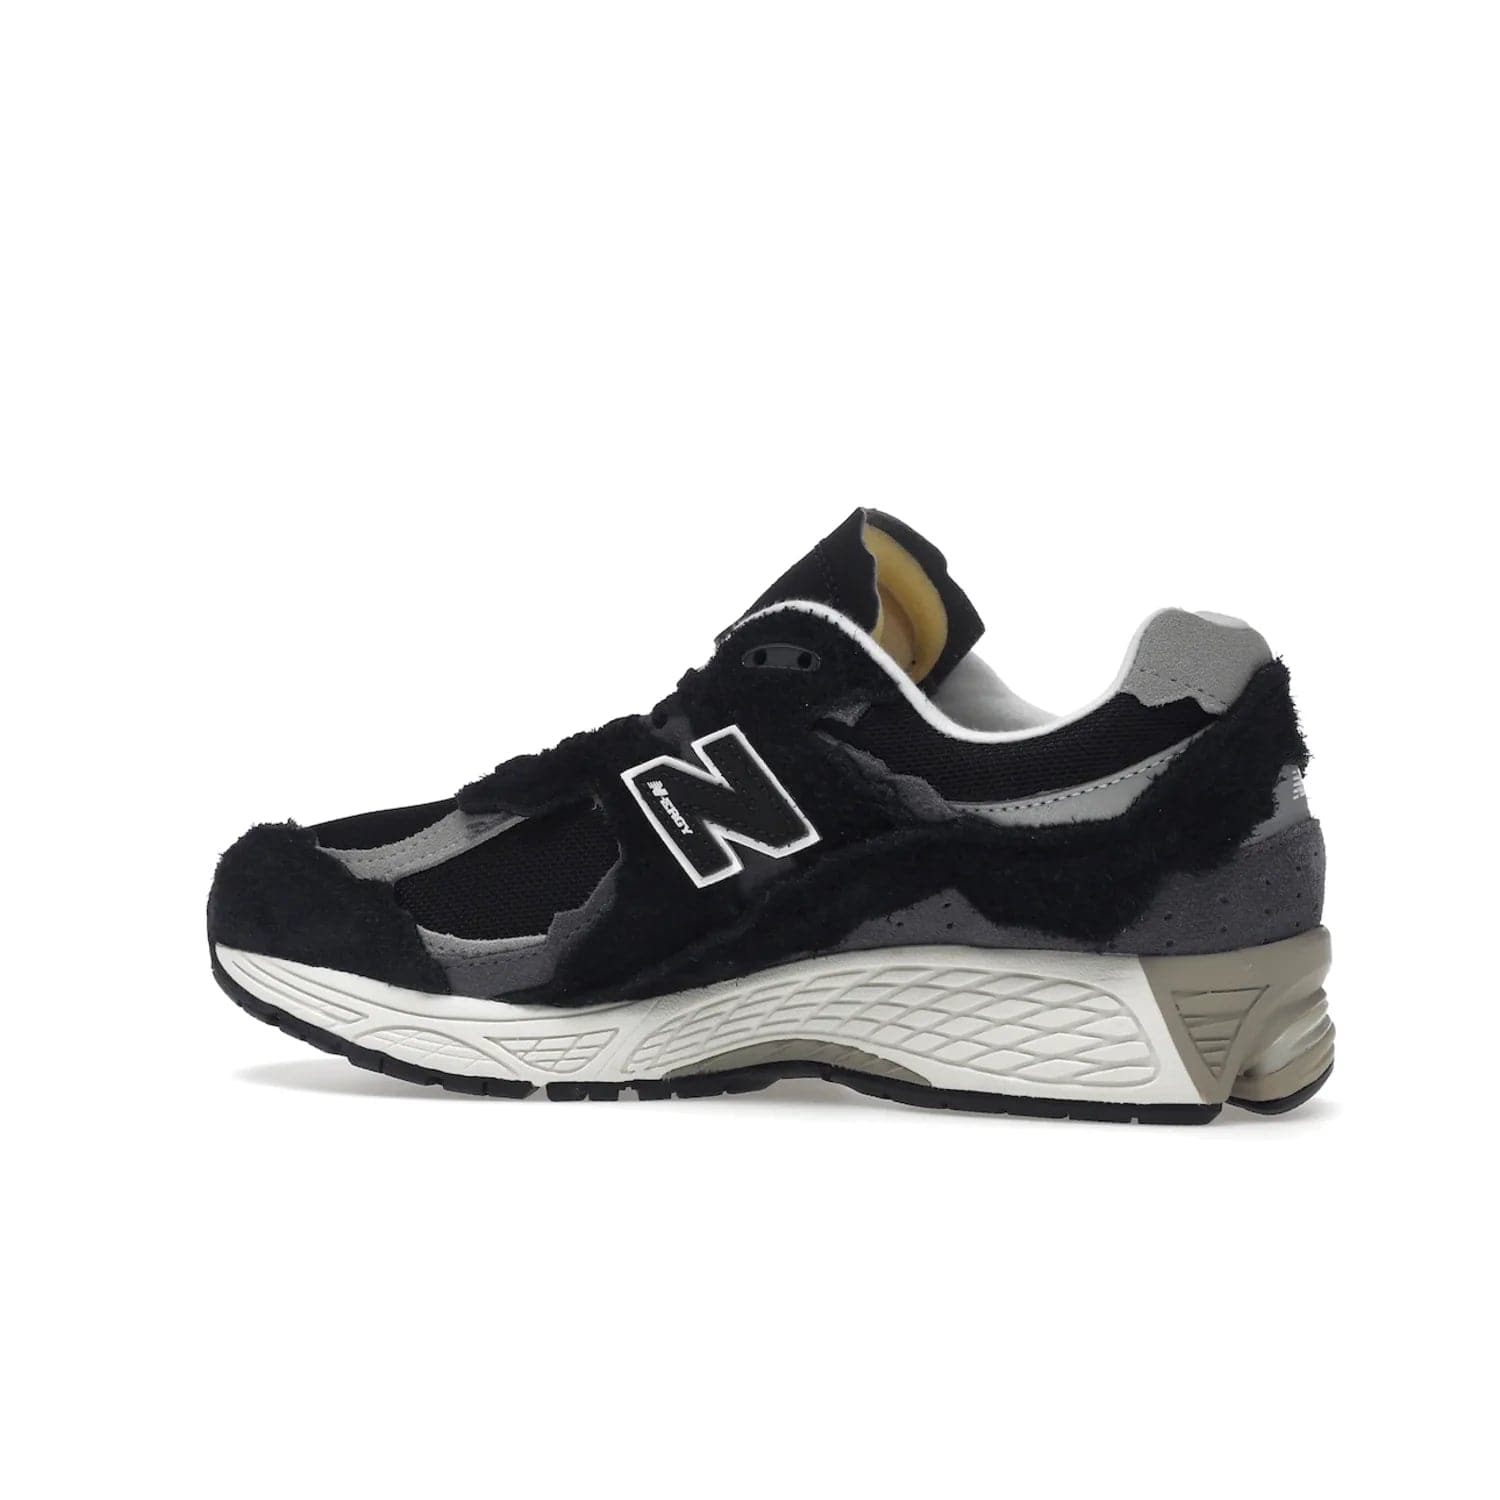 New Balance 2002R Protection Pack Black Grey - Image 21 - Only at www.BallersClubKickz.com - Look stylish in the New Balance 2002R Protection Pack Black Grey. Uppers constructed from premium materials like mesh and synthetic overlays. Iconic "N" emblem appears in white and black. ABZORB midsole for shock absorption and responsiveness. Black outsole for grip and traction. Lacing system offers customized fit and cushioned tongue and collar offer comfort and stability. Step up your style with this must-hav